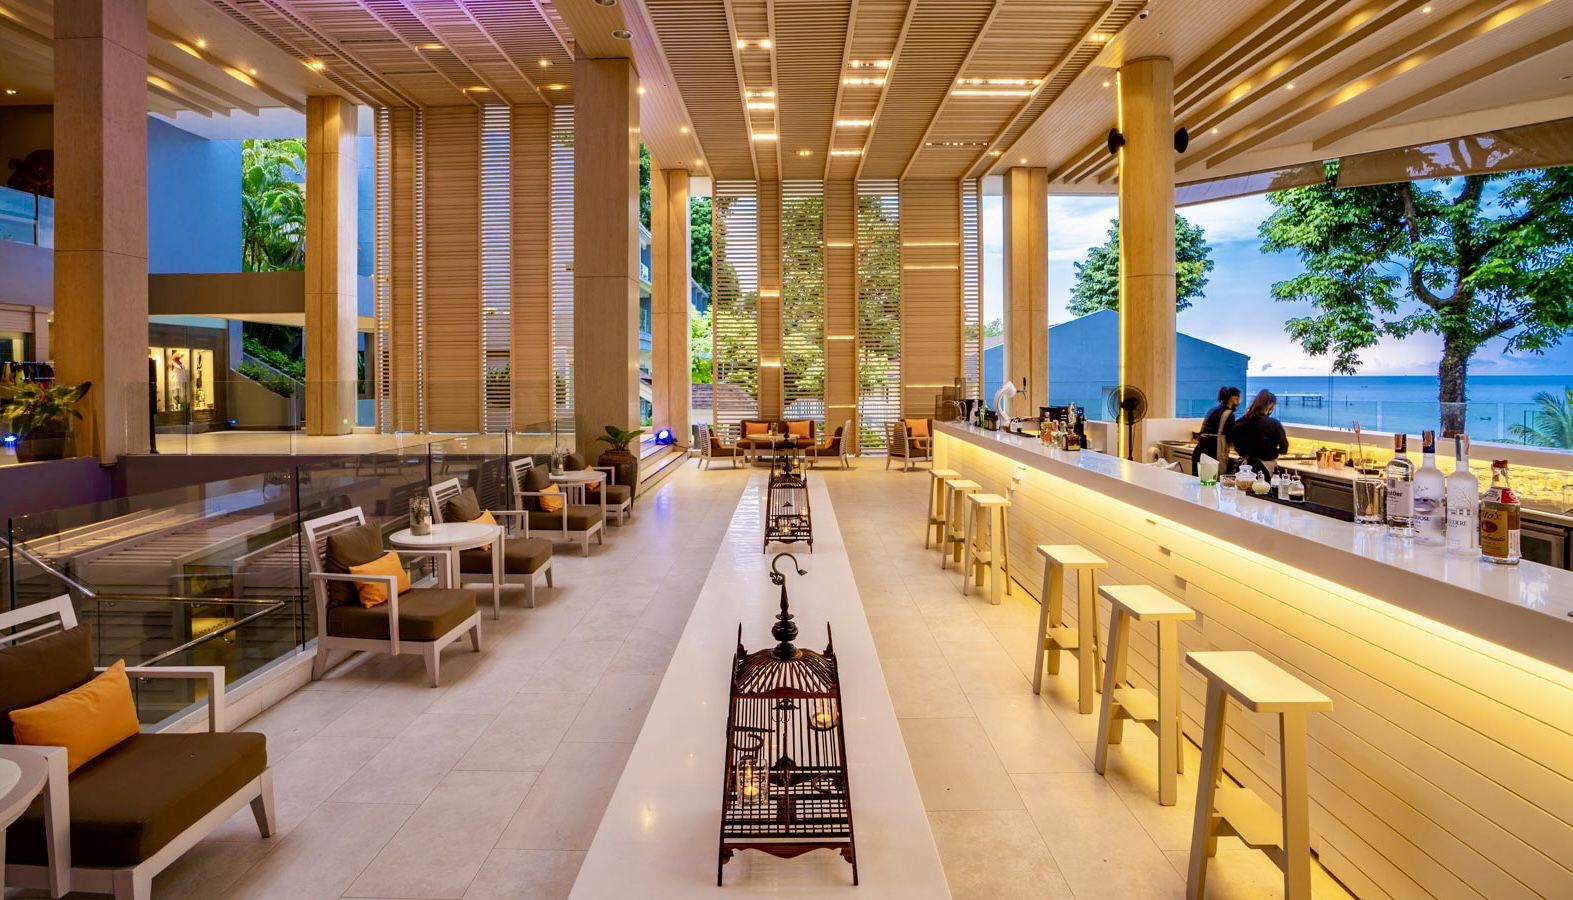 Samutr Bar @ Amari Phuket features a daily ‘Happy Hour’ for all beverages (except wine).